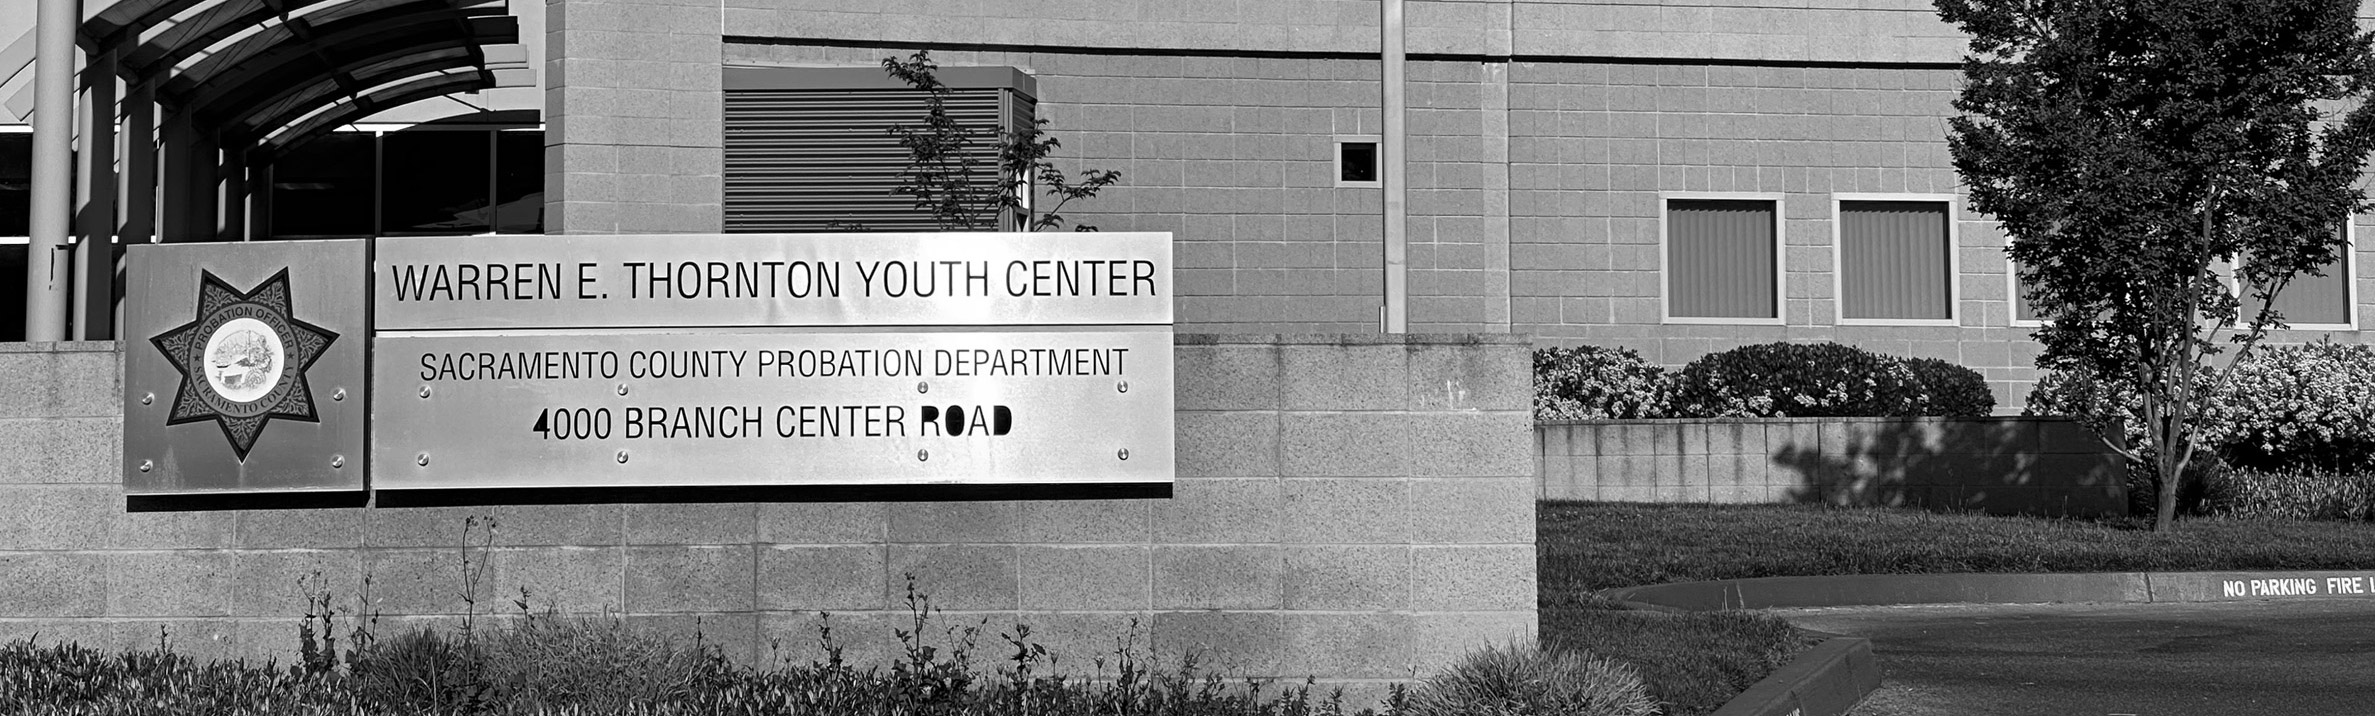 A metal sign in front of the facility that reads - Warren E. Thornton Youth Center, Sacramento County Probation Department, 4000 Branch Center Road.